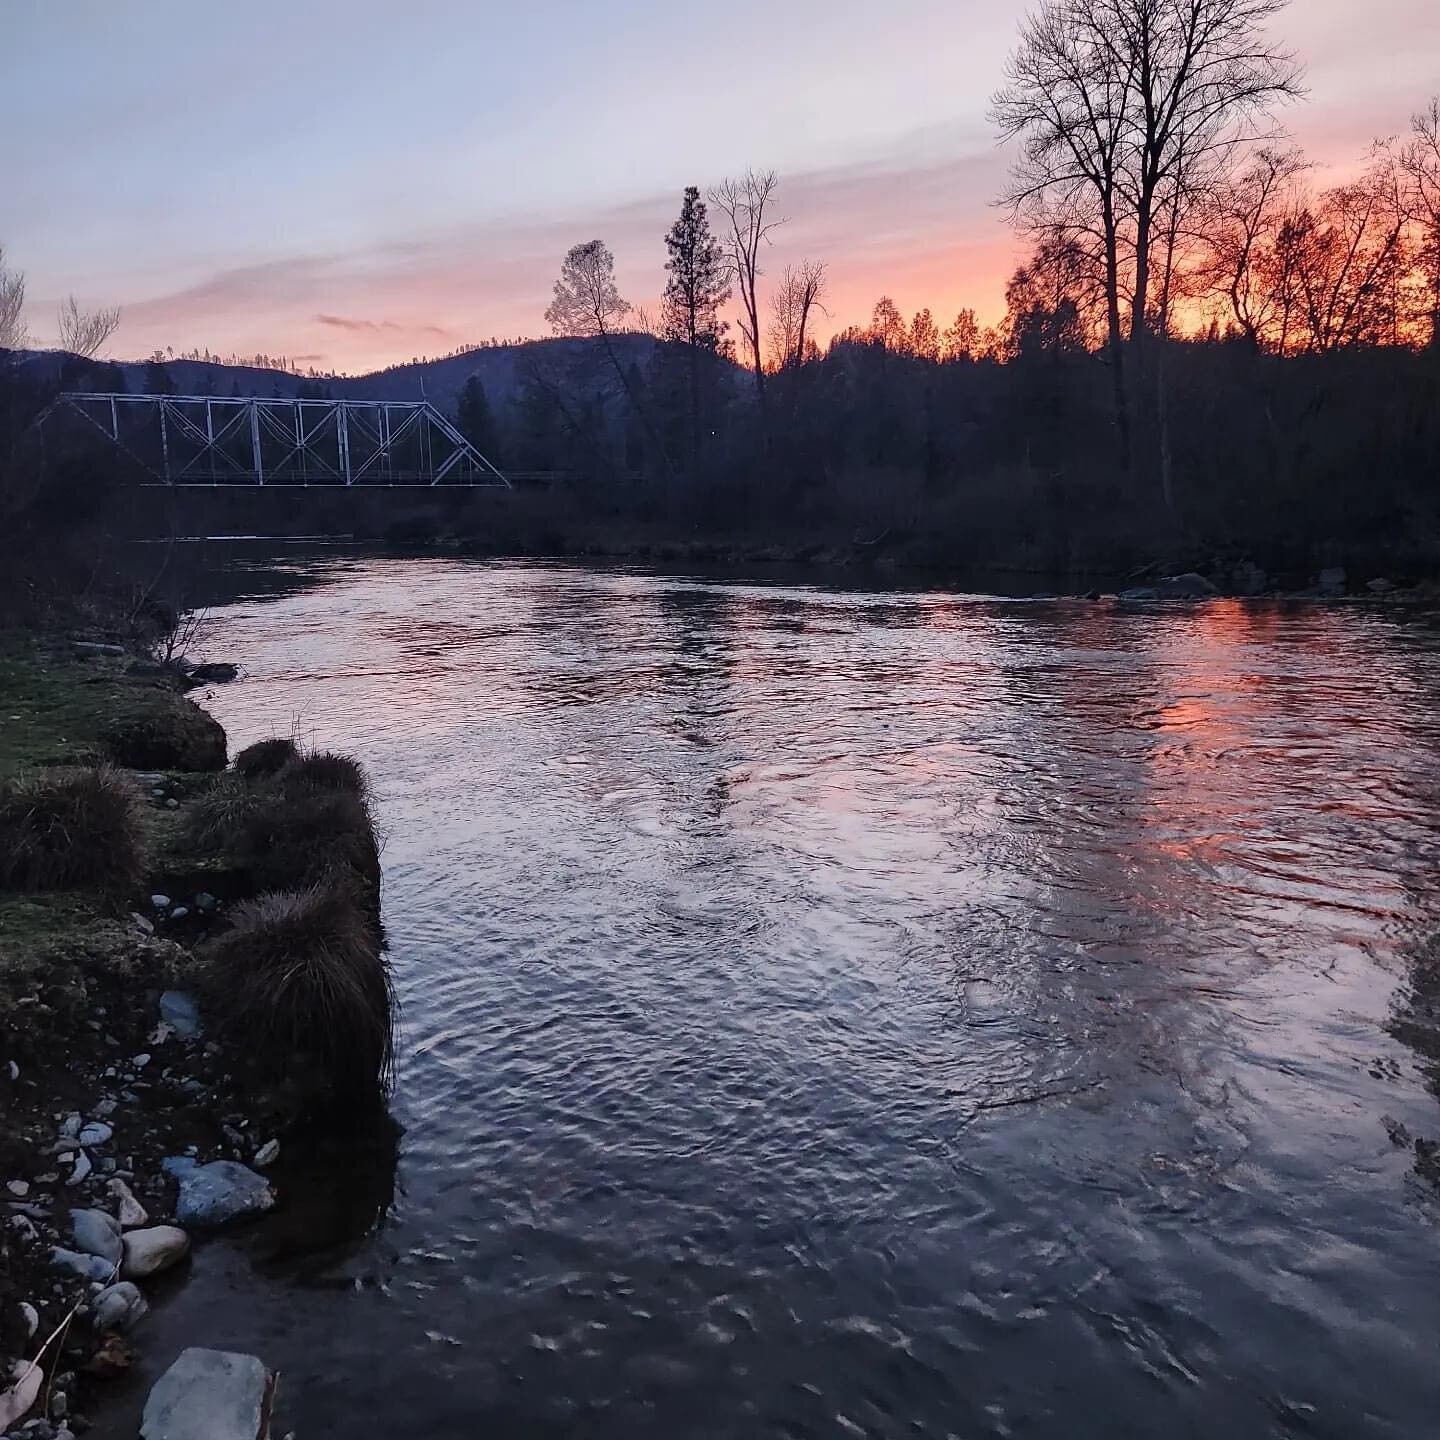 This Old Bridge, in all her glory! 🌅❤️🌲

📸 Tim Robertson